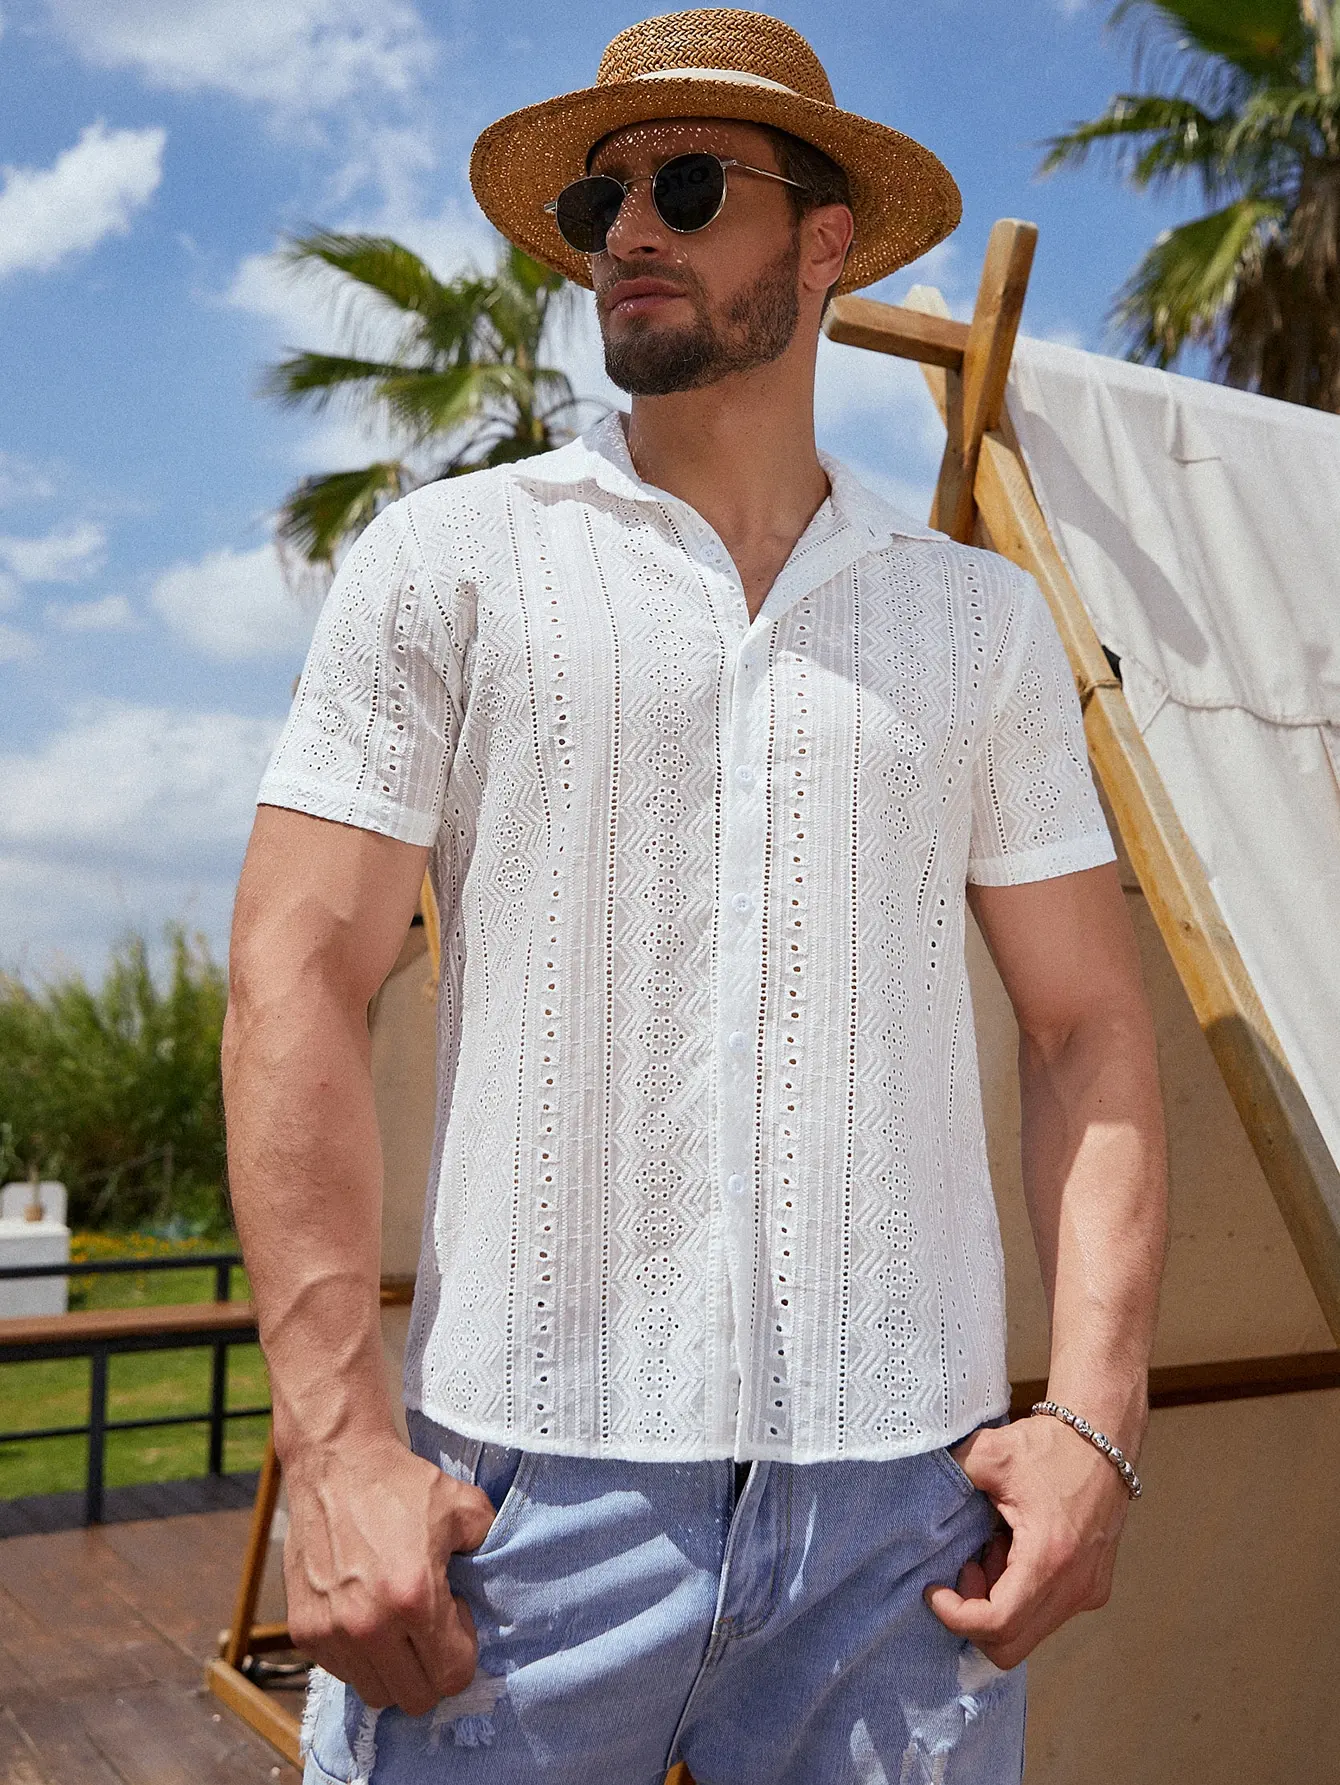 

Men Hollow Out Summer Cool Sexy New Fashion Style Hawaiin Mesh See Through Street Casual Shirt